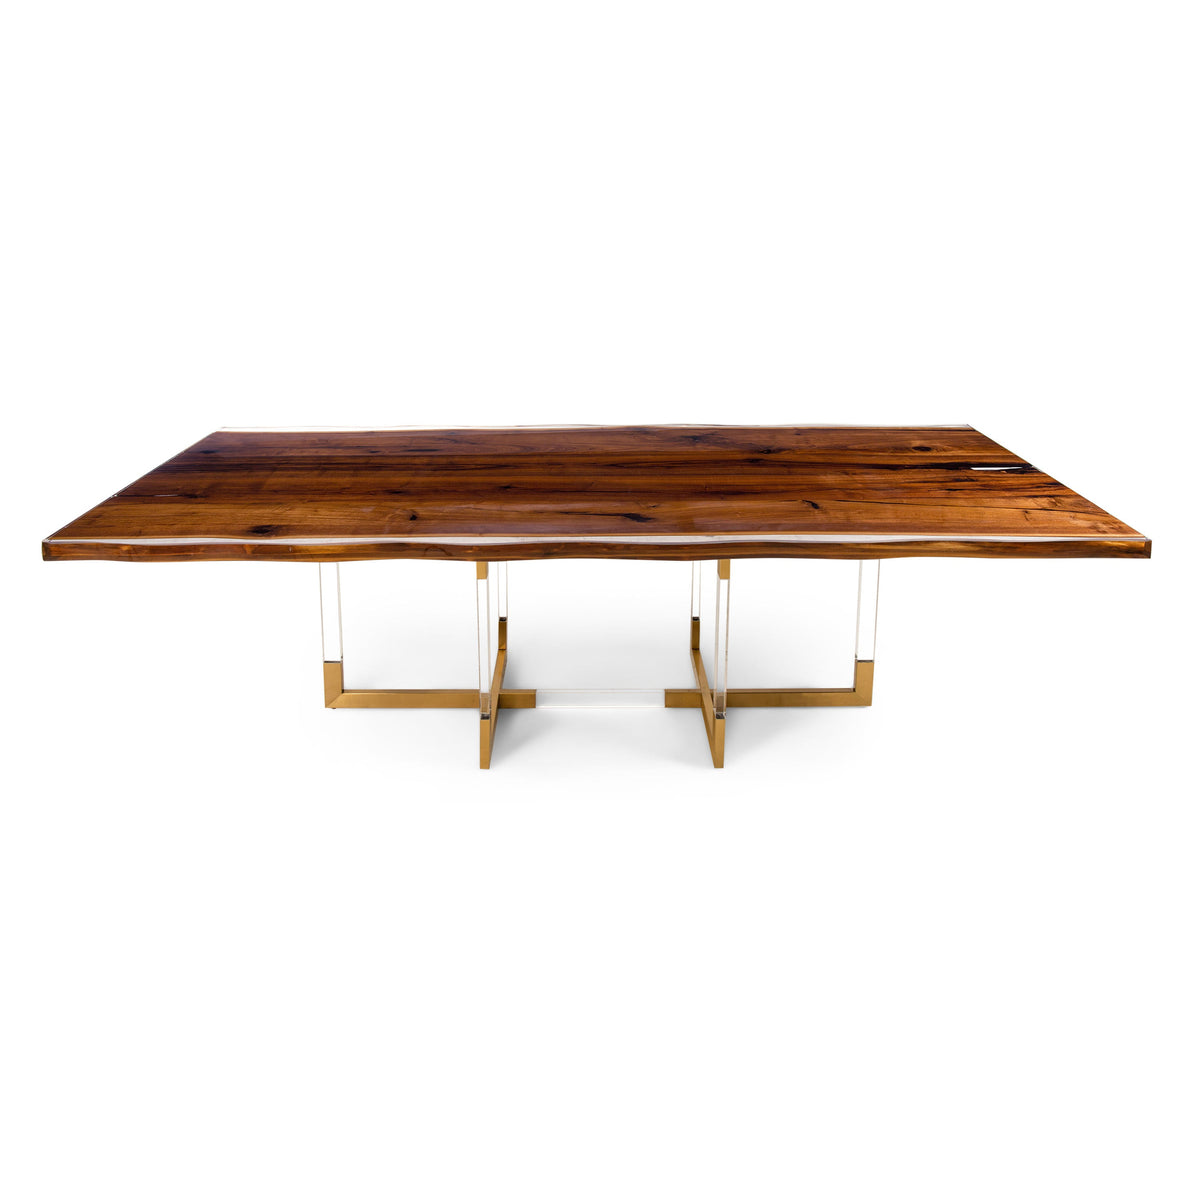 Live Edge Solid Walnut Slab Dining Table with Resin Finish